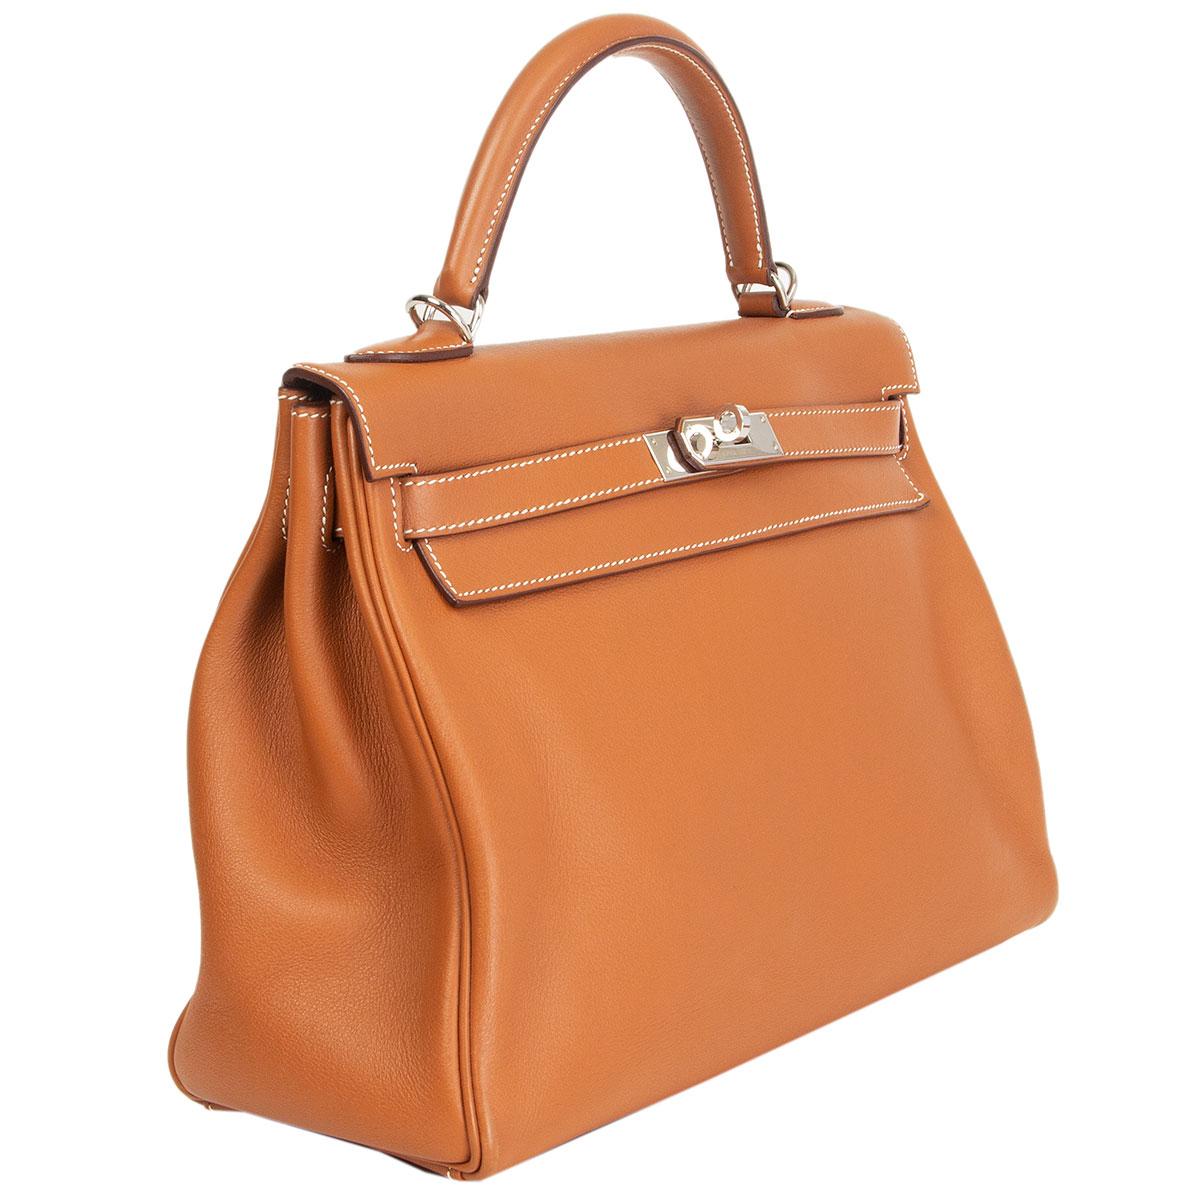 Hermes 'Kelly II 32 Retourne' bag in Gold (camel) Veau Swift leather with palladium-plated hardware. The interior is lined in Chevre (goat skin) with a divided open pocket against the front and a zipper pocket against the back. Has been carried and